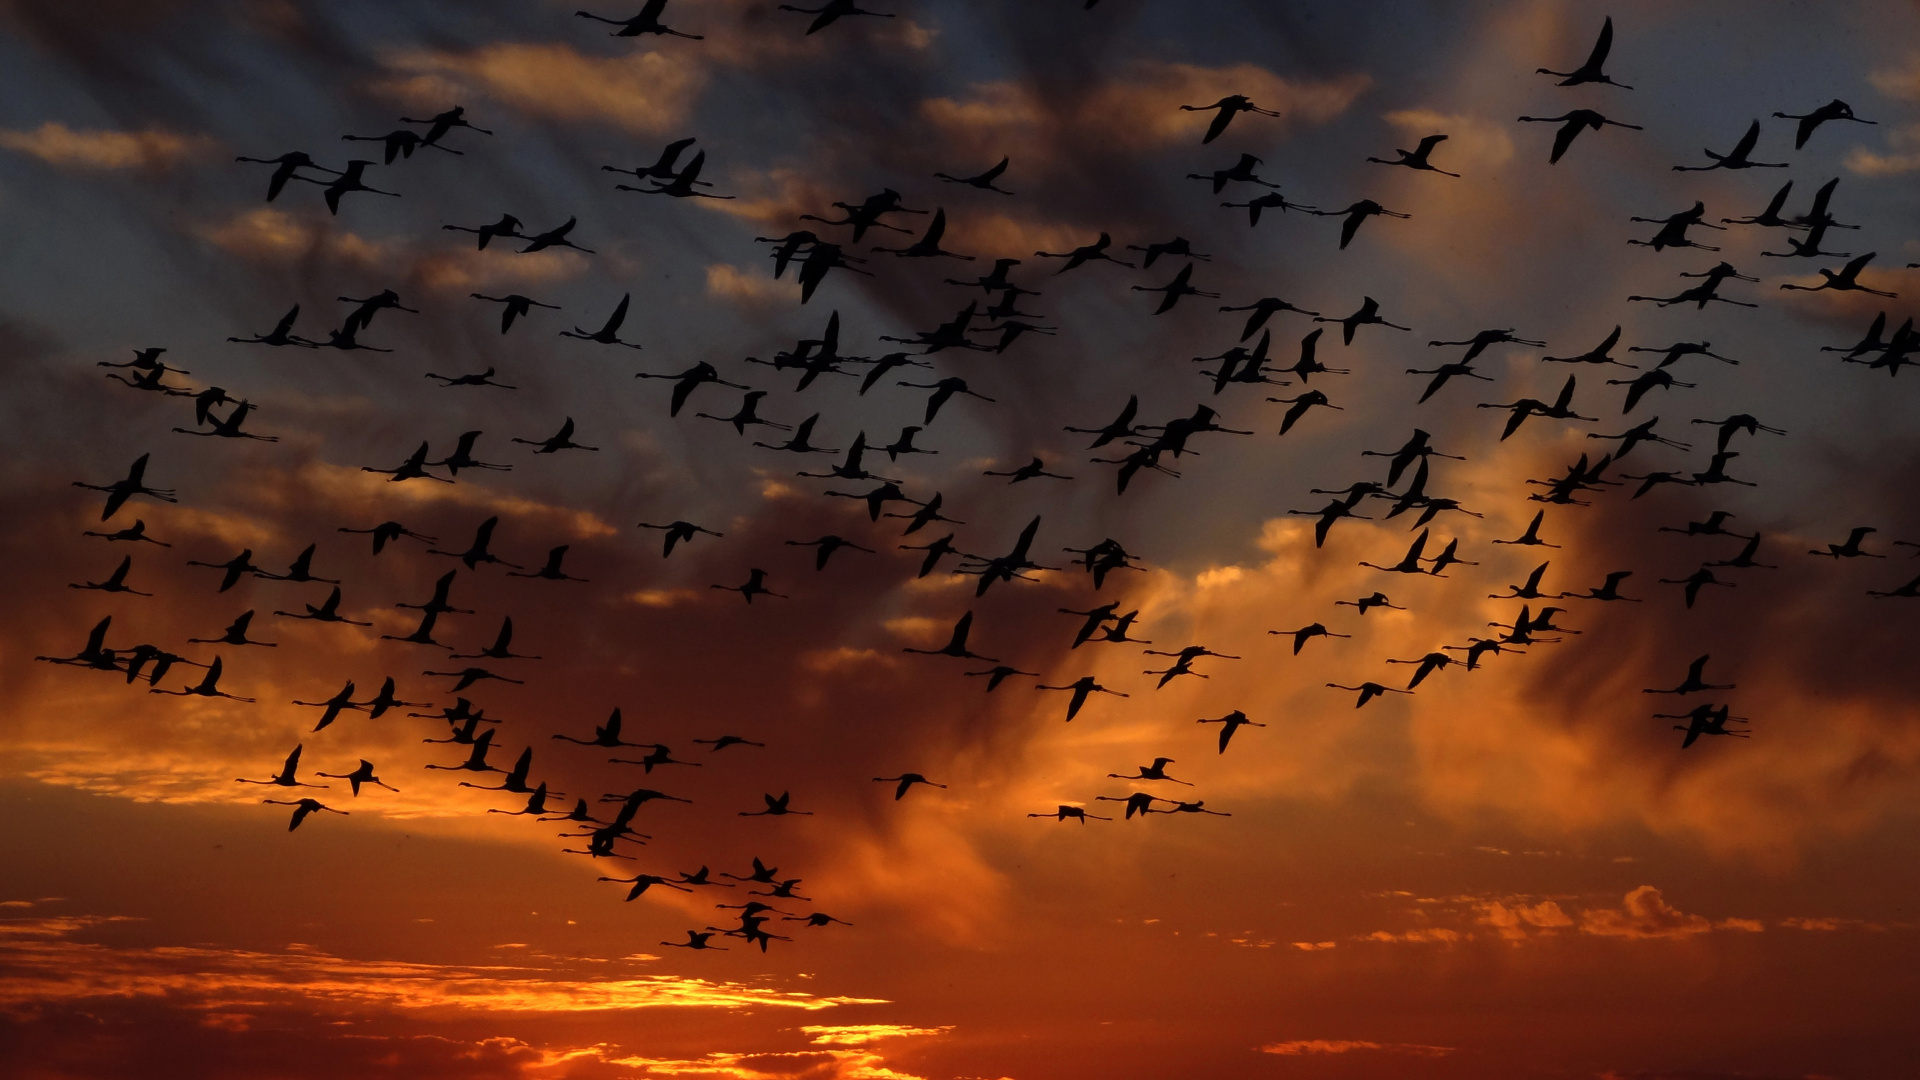 Silhouette of Flock of Birds Flying During Sunset. Wallpaper in 1920x1080 Resolution